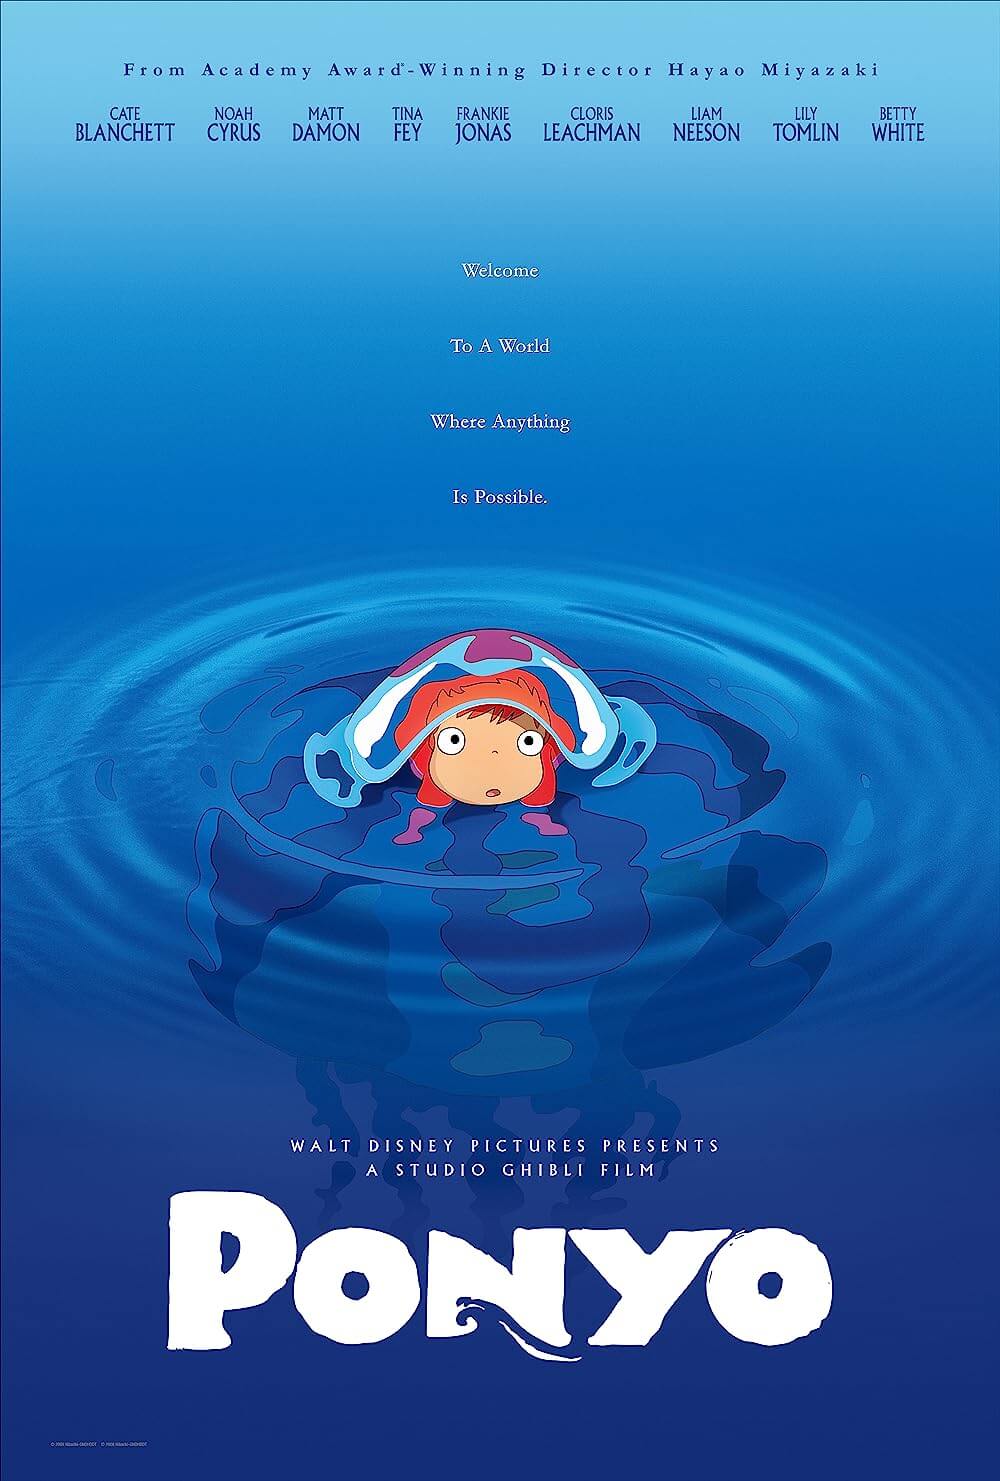 Watch Ponyo, one of the best G rated movies for 5 year olds on Netflix.